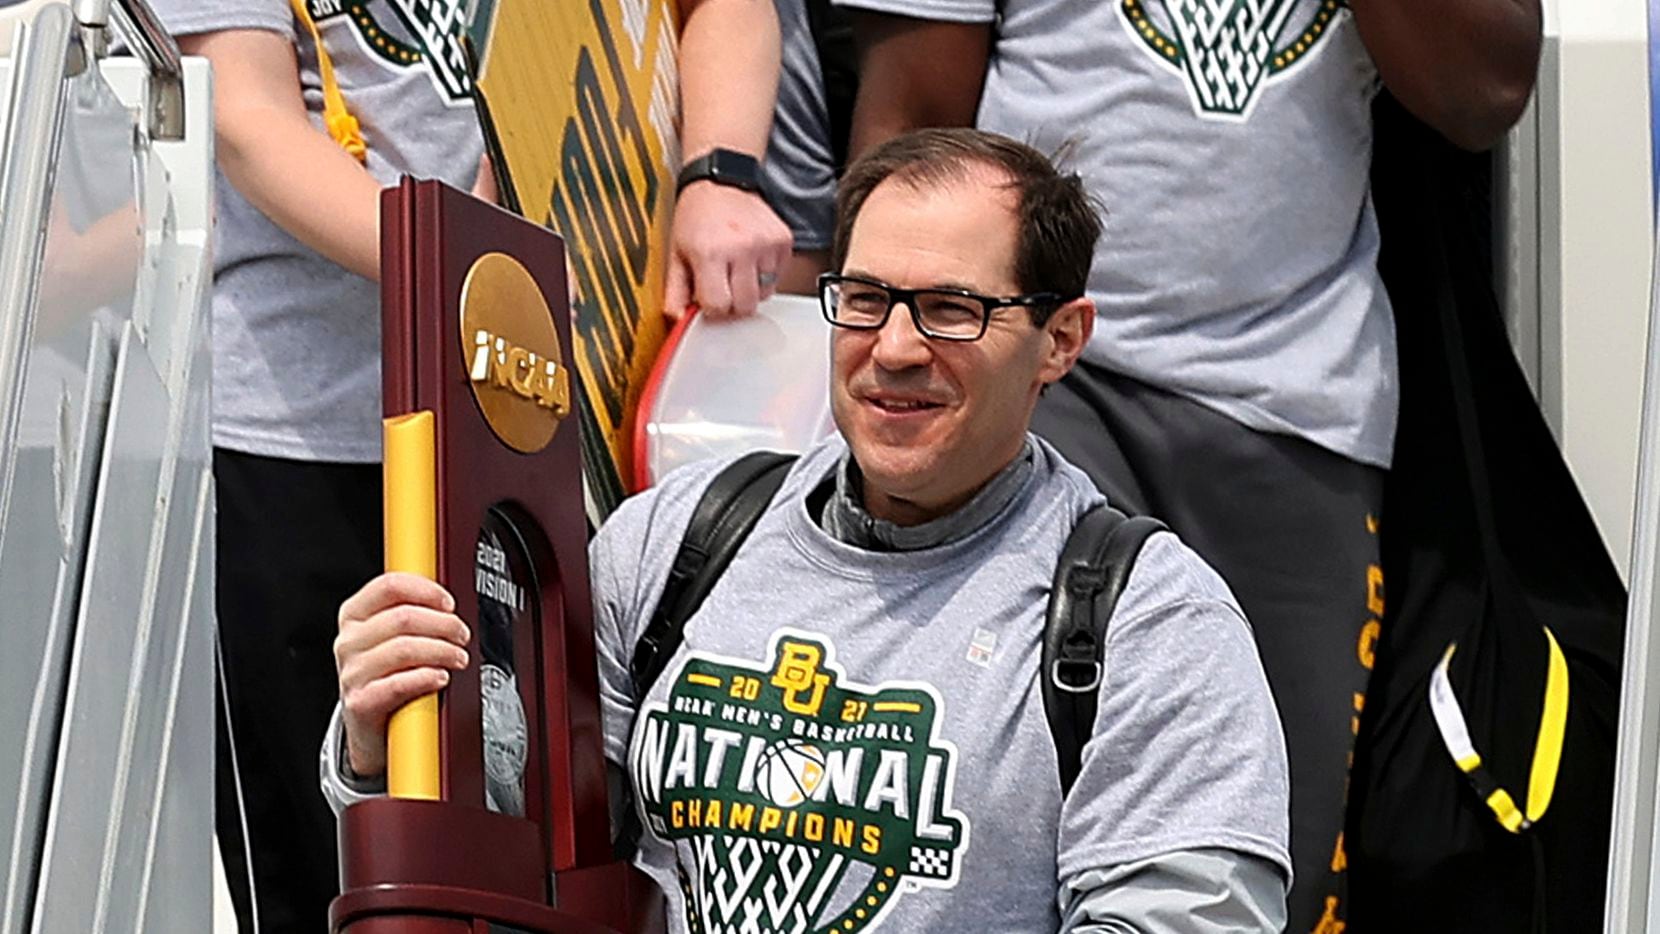 Baylor men's basketball Head Coach Scott Drew carries the NCAA Division I National Championship trophy as he exits the plane Tuesday, April 6, 2021, in Waco, Texas.